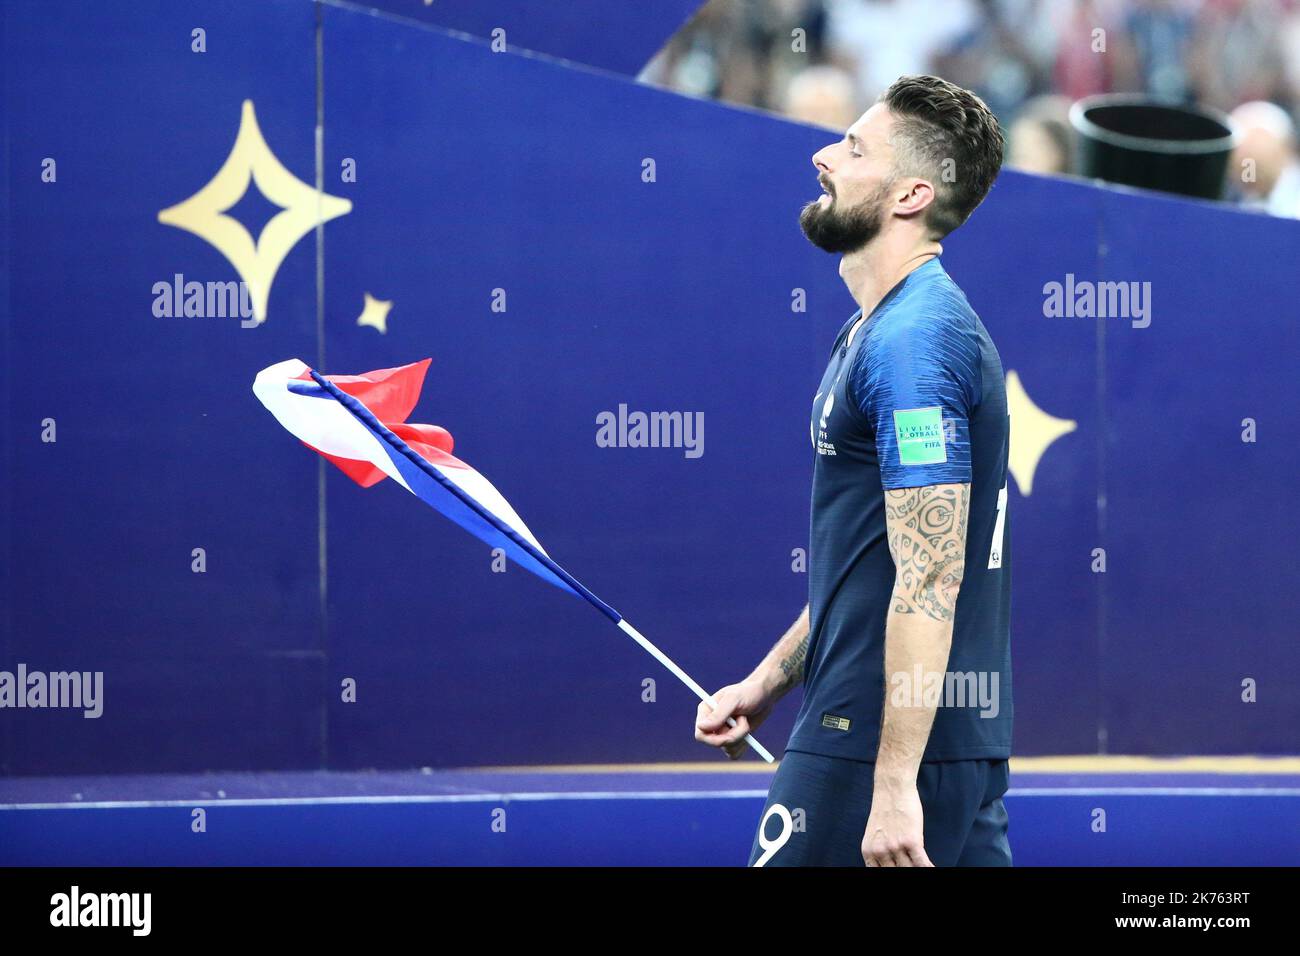 FIFA World Cup Russia 2018, Final Football Match France versus Croatia, France is the new World Champion. France won the World Cup for the second time 4-2 against Croatia. Pictured: FRA9 FW Olivier Giroud © Pierre Teyssot / Maxppp Stock Photo